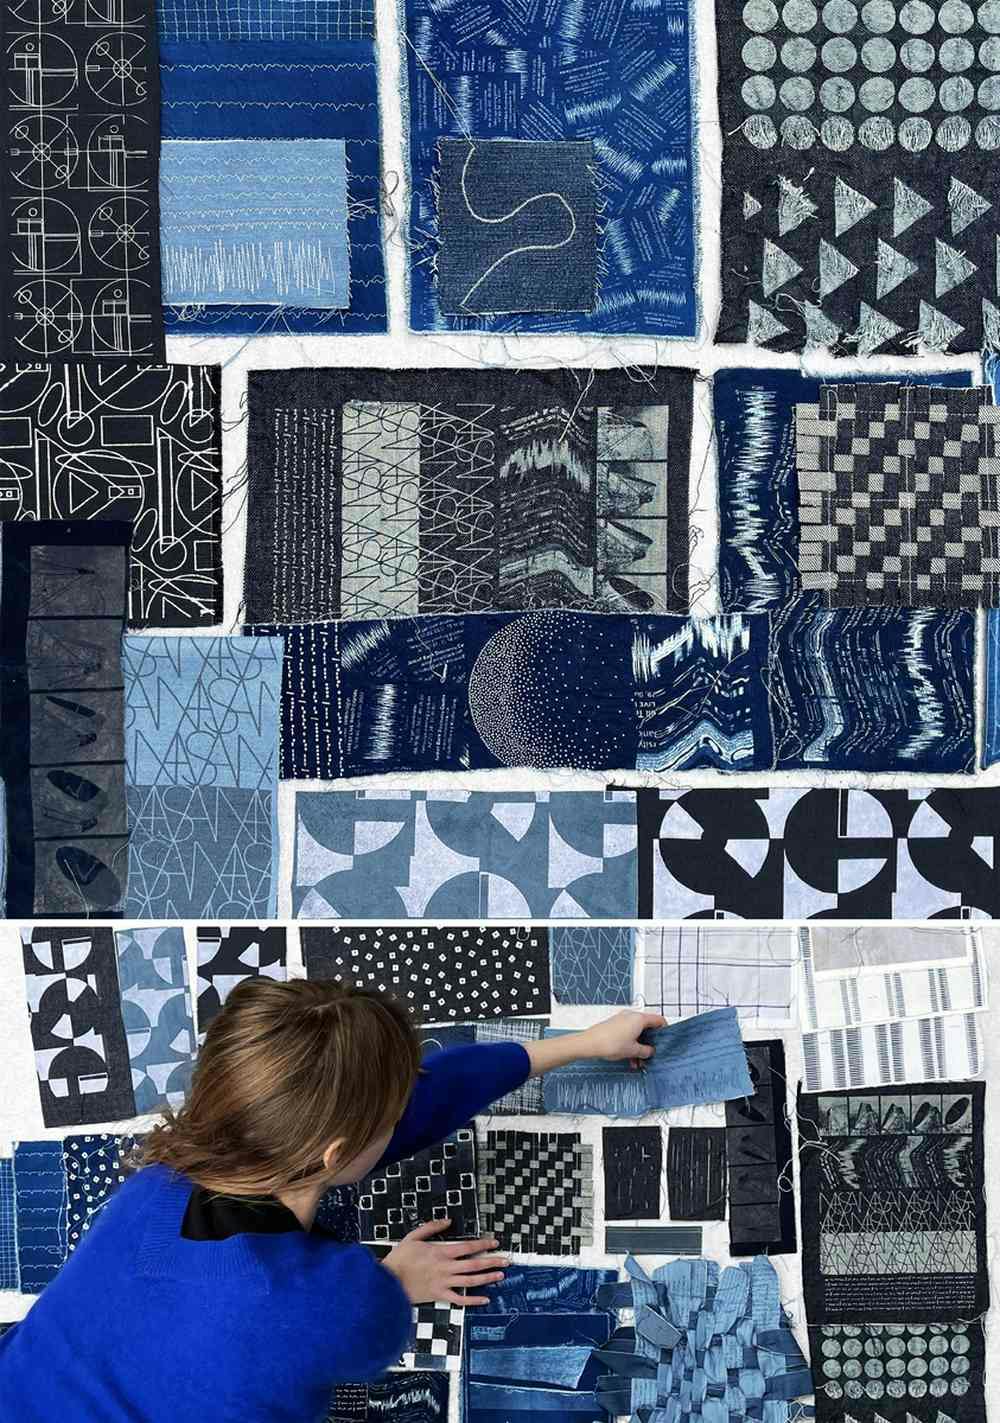 Two photographs featuring a collage of various blue fabrics placed together with different print and embroidered patterns. The second photograph shows a person placing a piece of fabric on the collage.